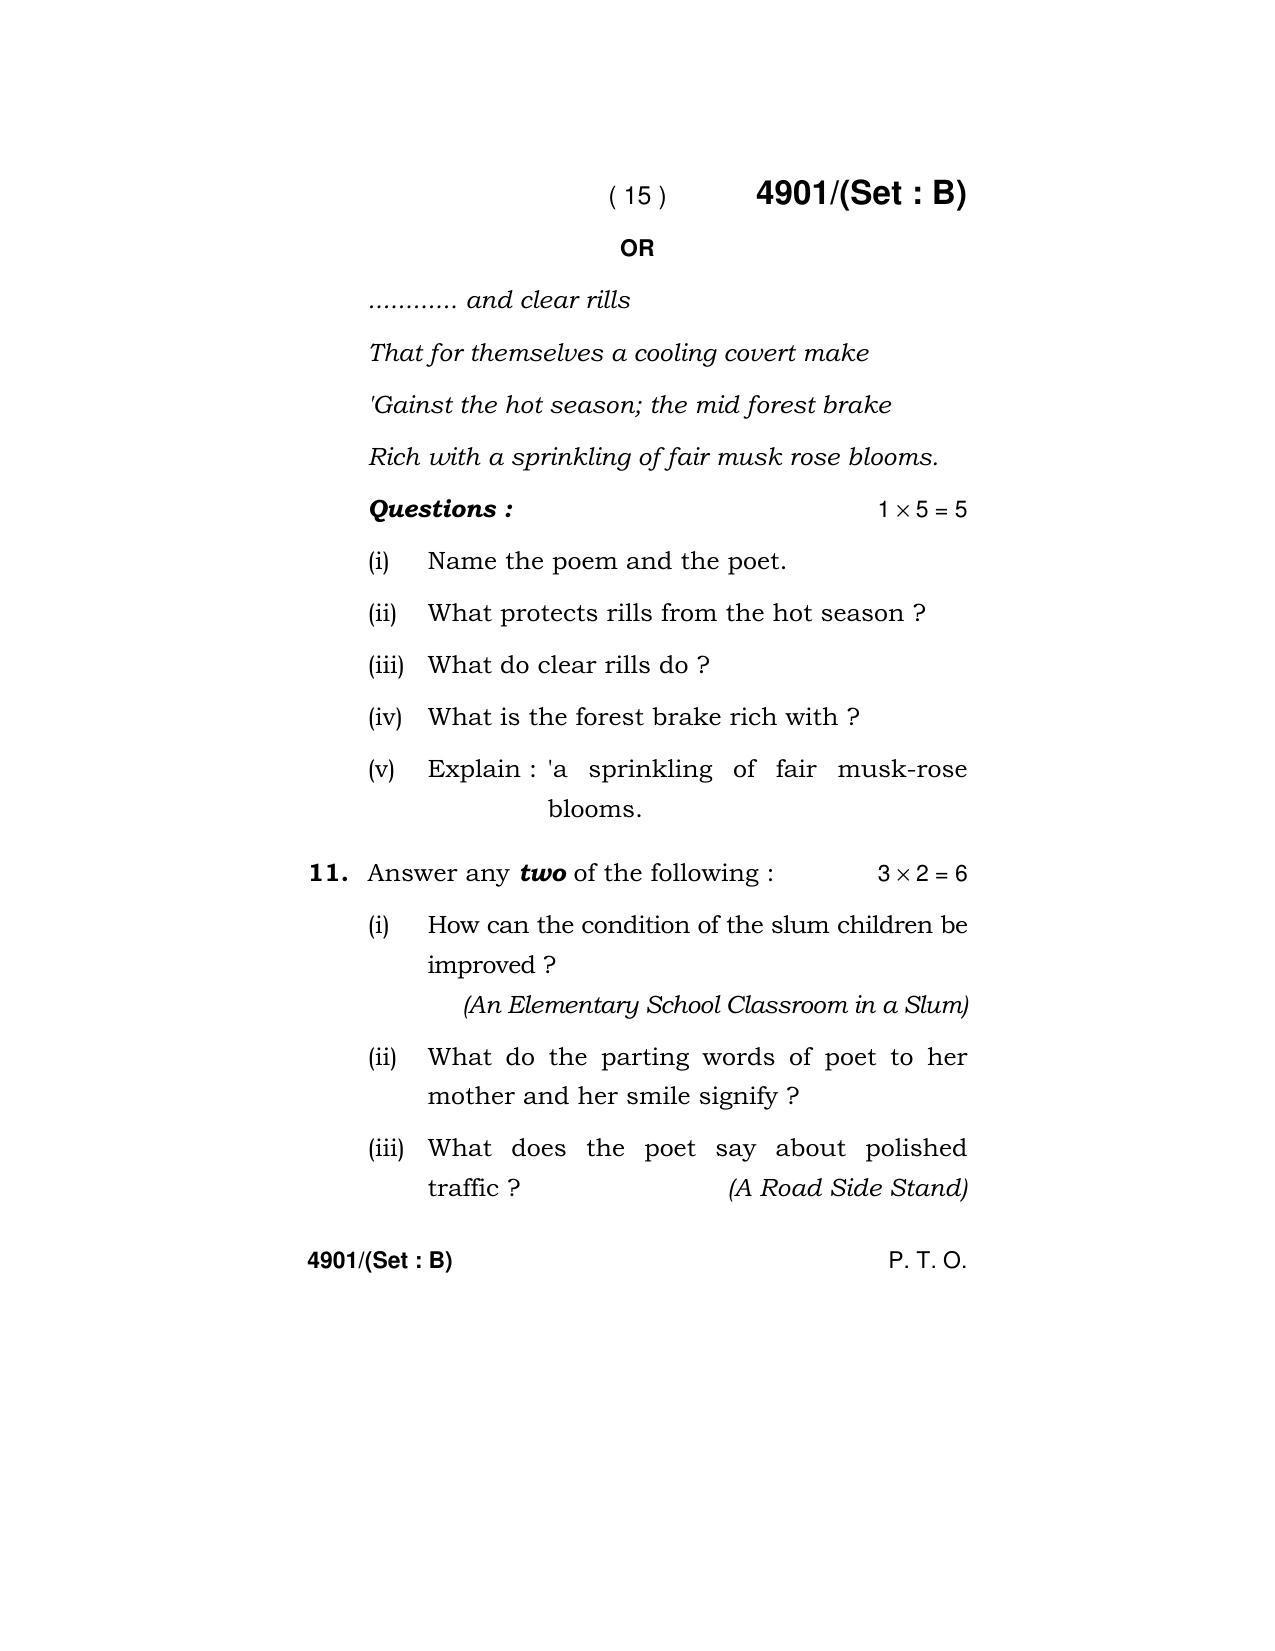 Haryana Board HBSE Class 12 English Core 2020 Question Paper - Page 31